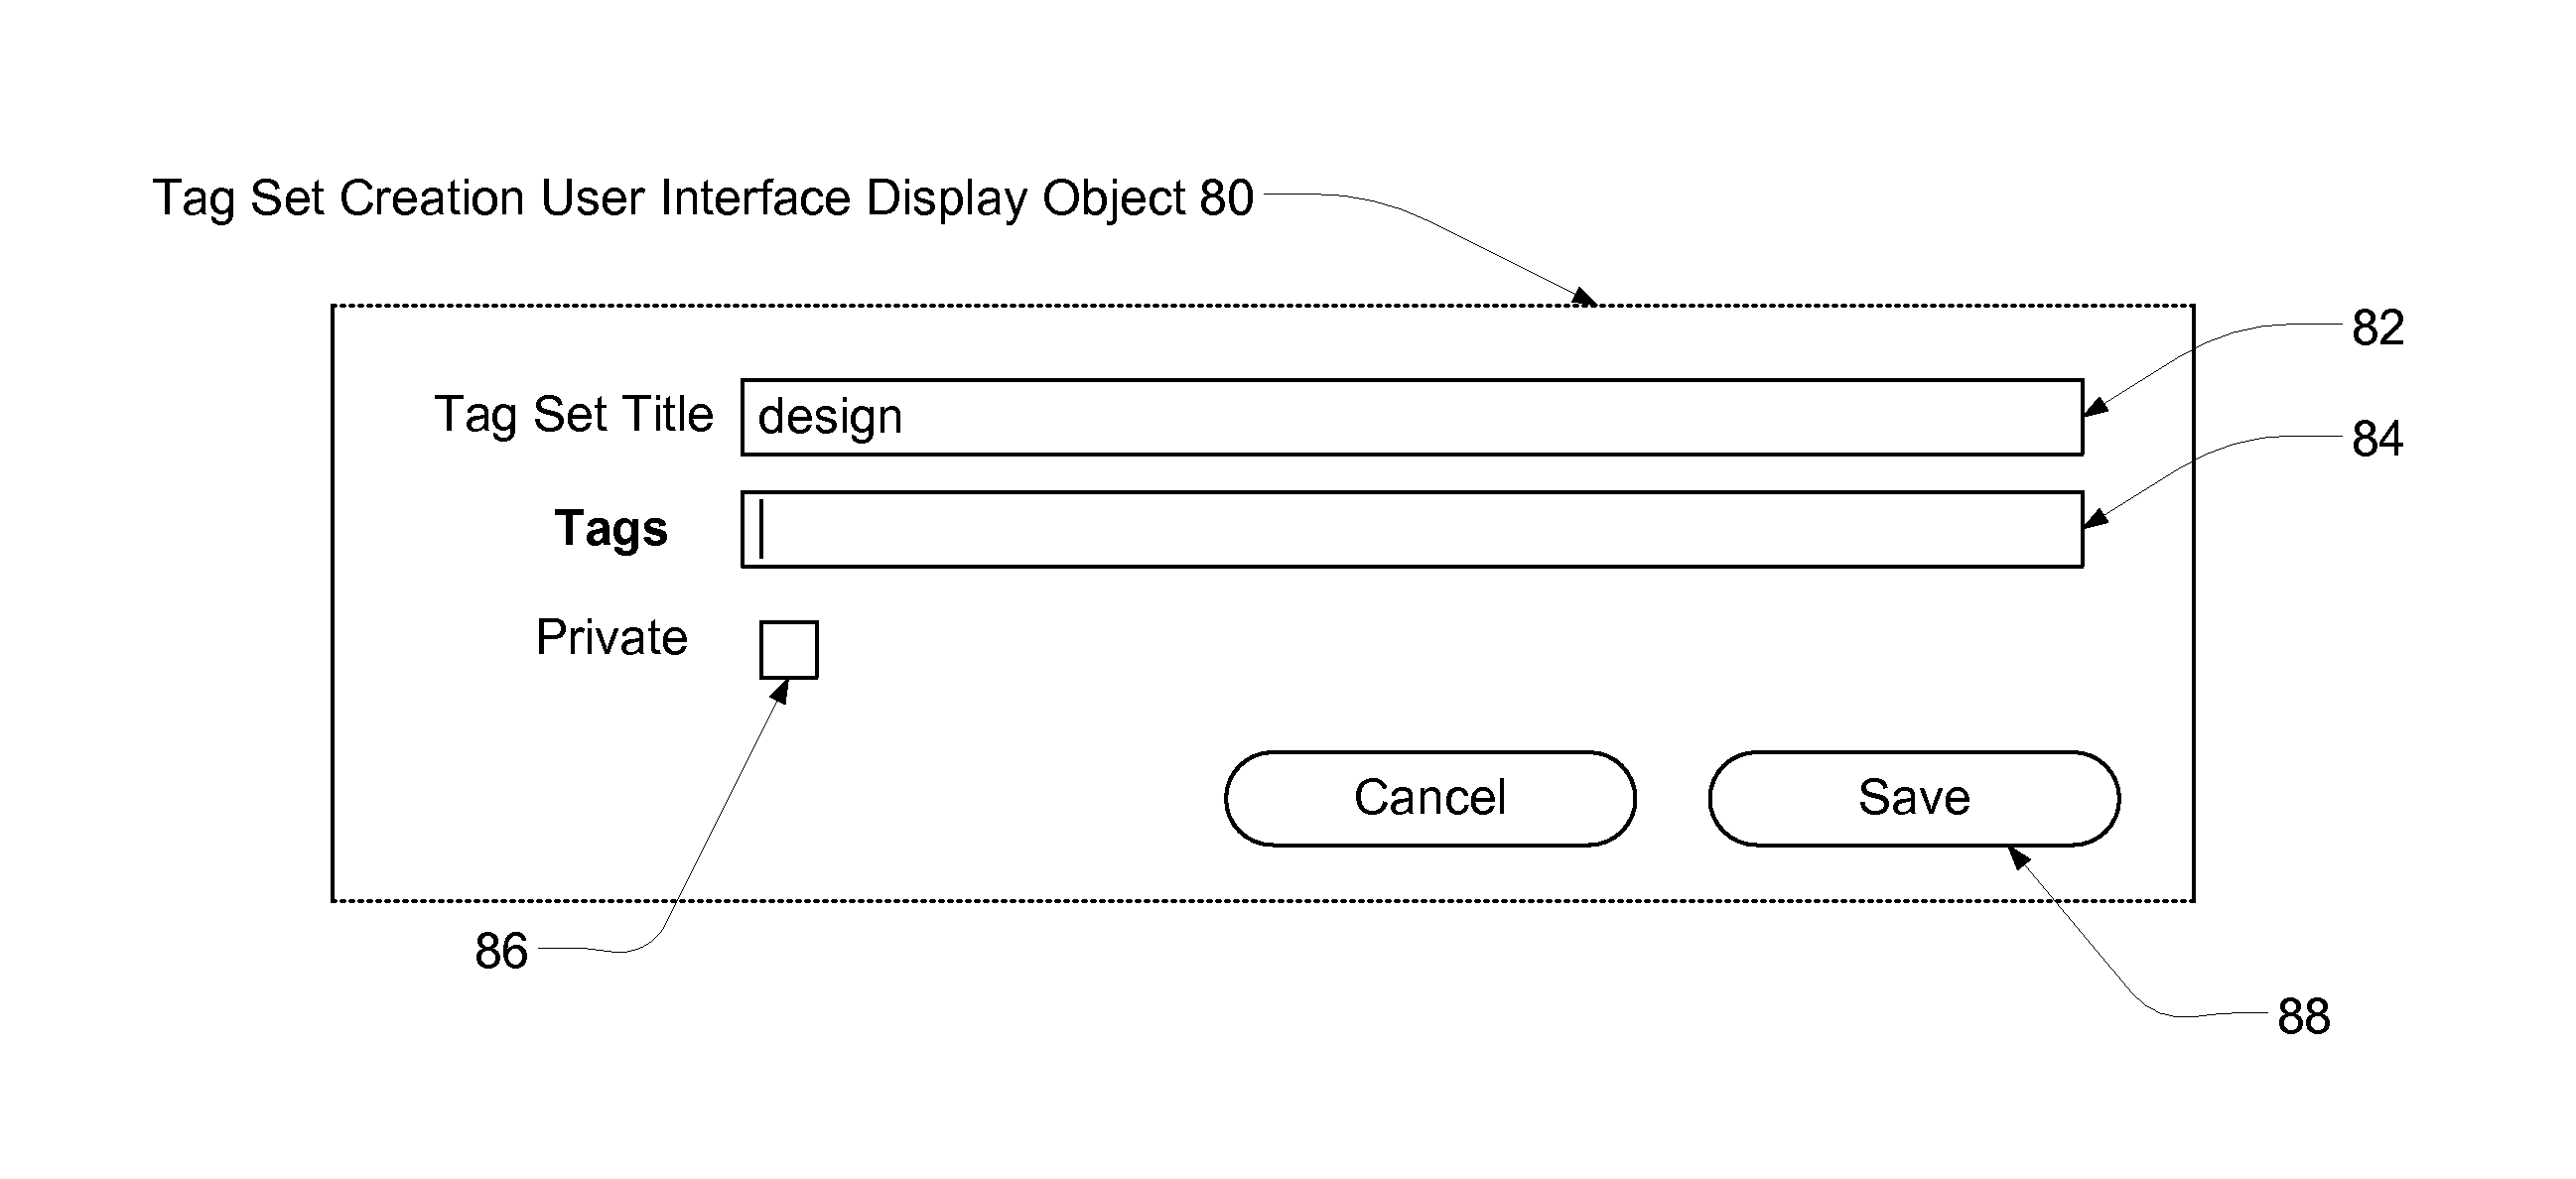 Method and sytem for providing collaborative tag sets to assist in the use and navigation of a folksonomy